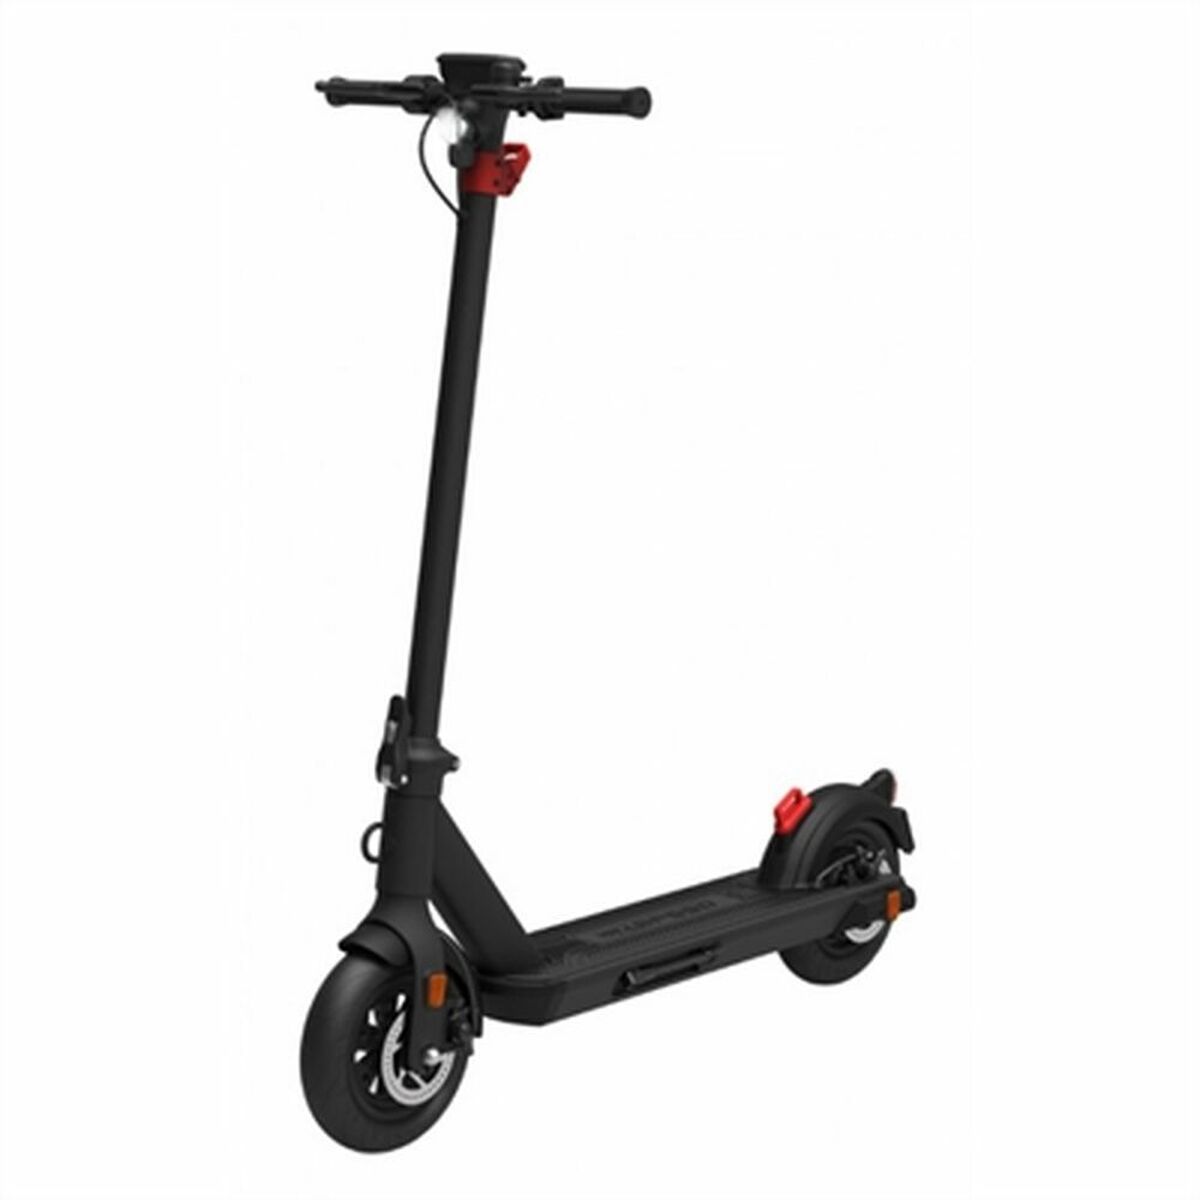 Electric Scooter Logicom SUV1000 Black 10" 320 W IPX6 36 V, Logicom, Sports and outdoors, Urban mobility, electric-scooter-logicom-suv1000-black-10-320-w-ipx6-36-v, Brand_Logicom, category-reference-2609, category-reference-2629, category-reference-2904, category-reference-t-19681, category-reference-t-19756, category-reference-t-19876, category-reference-t-21245, Condition_NEW, deportista / en forma, Price_600 - 700, RiotNook